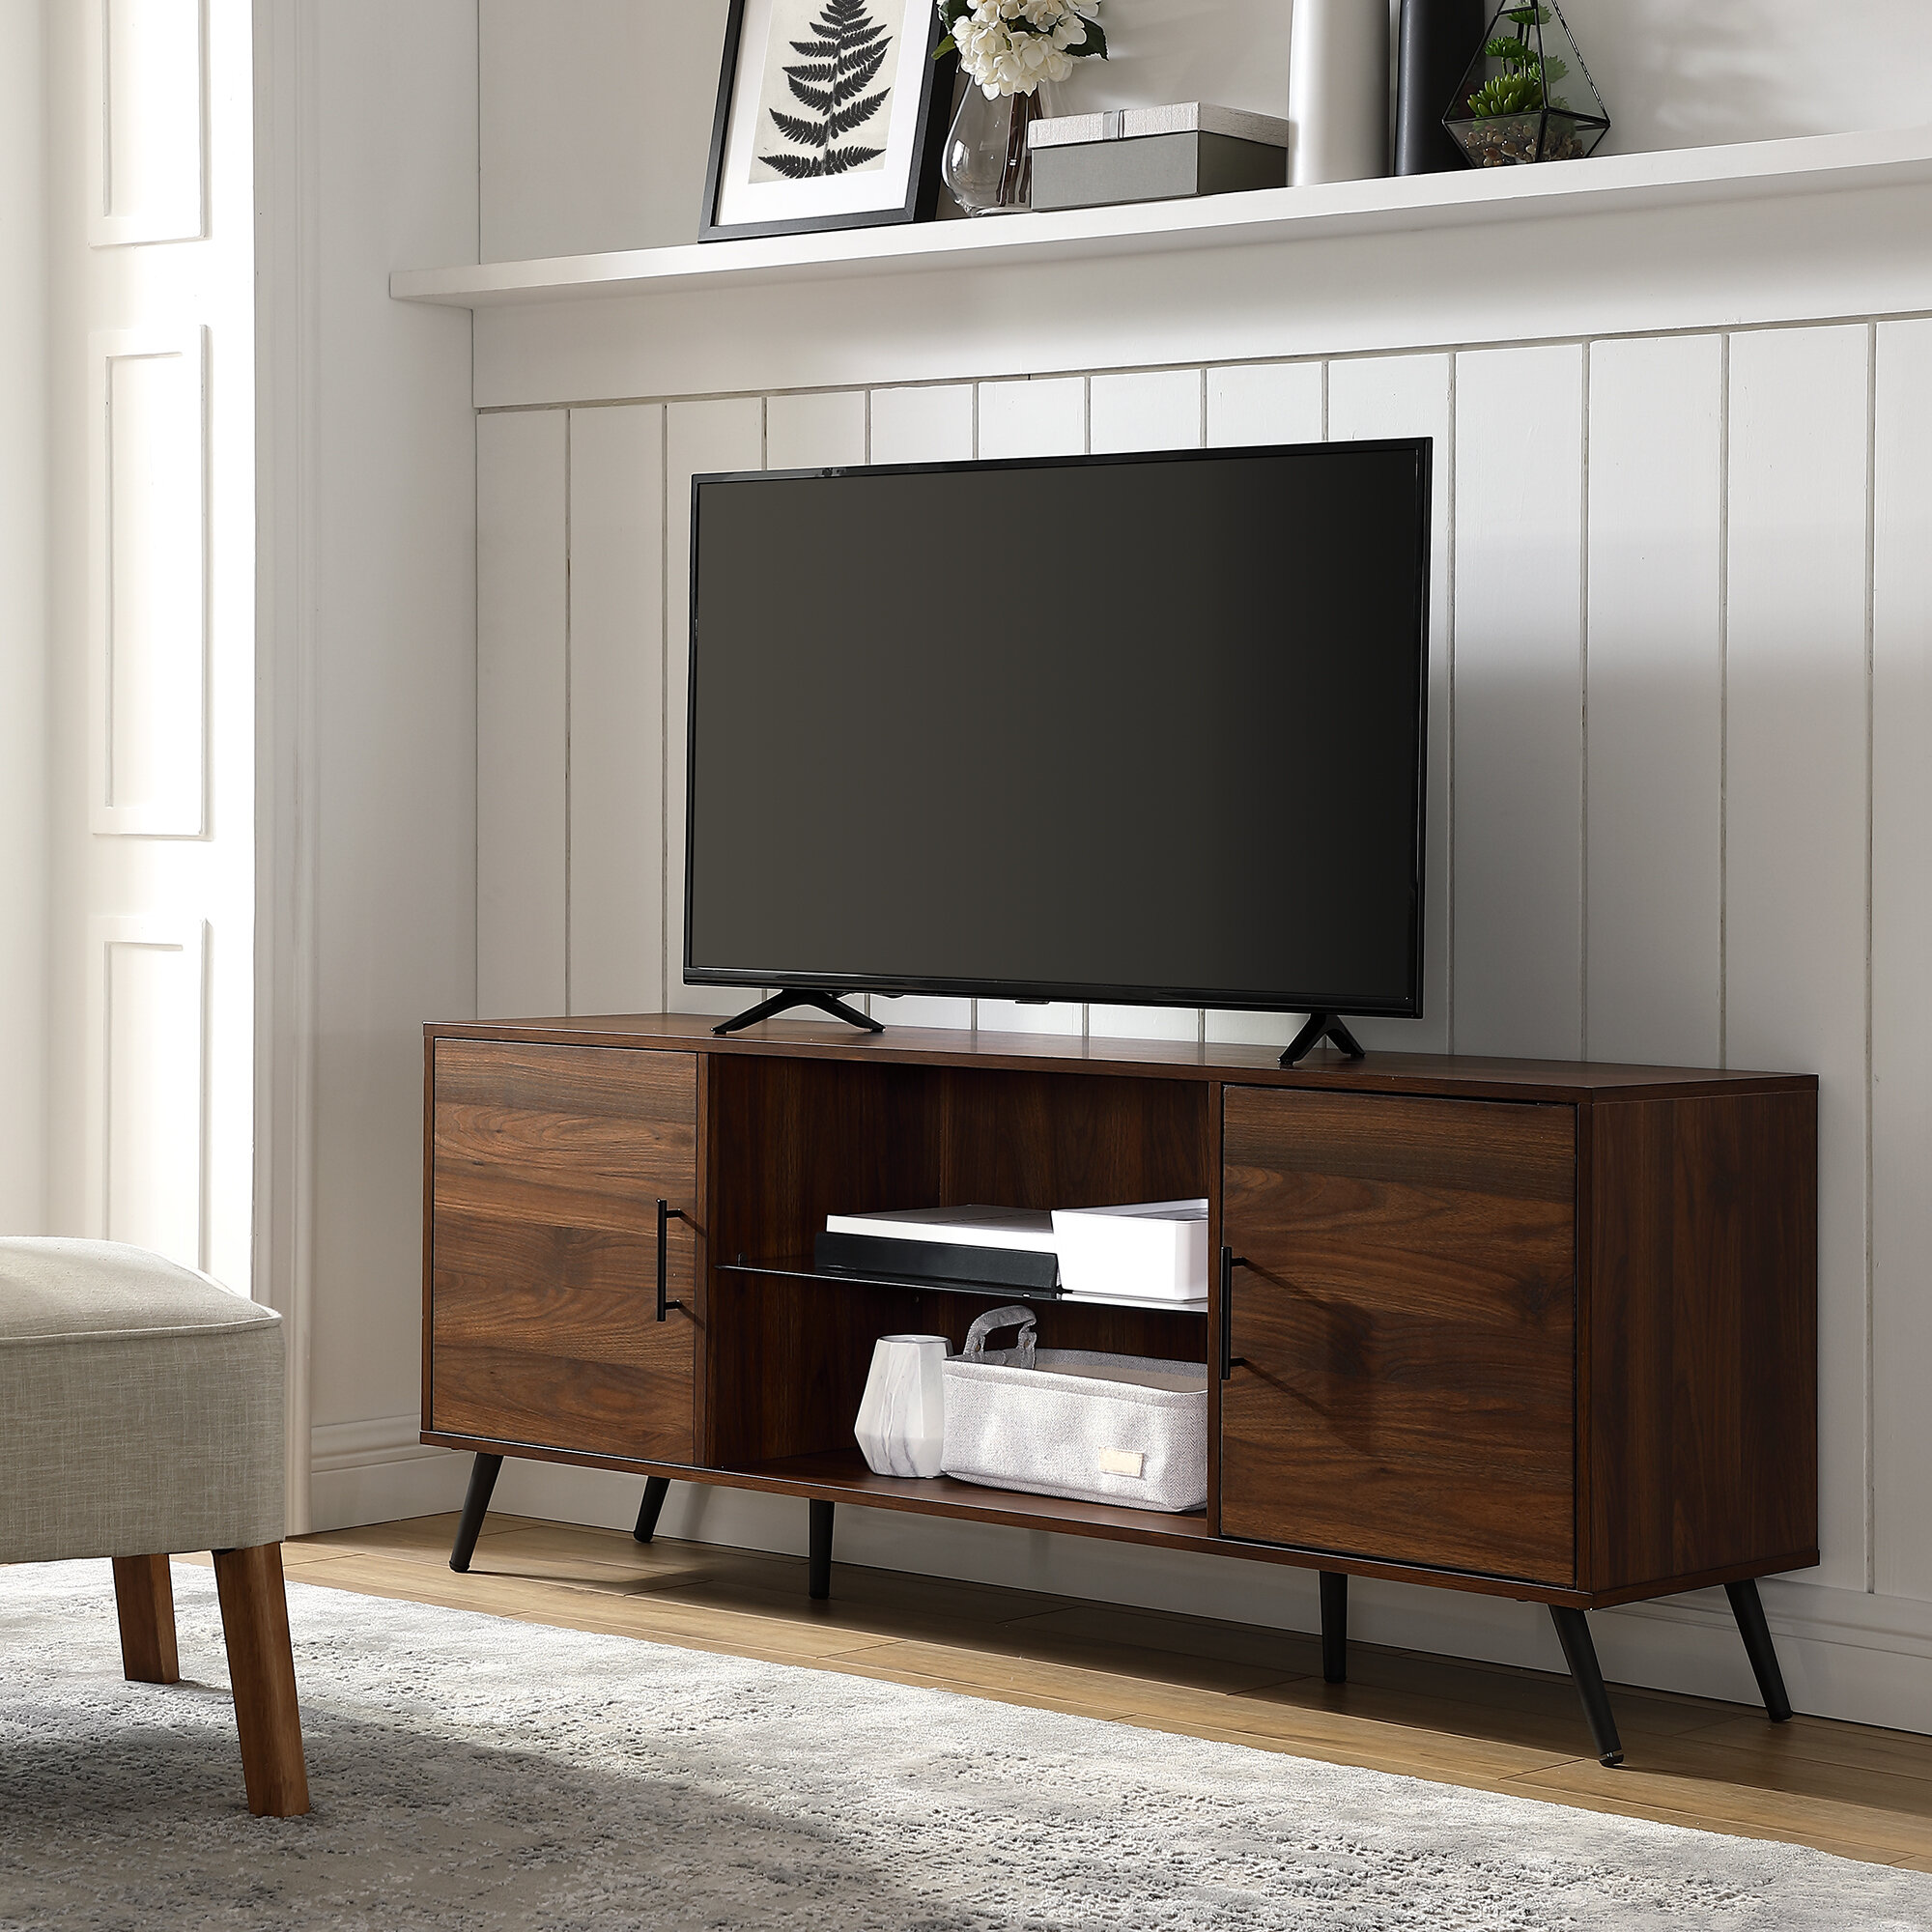 Top Rated TV Stands 